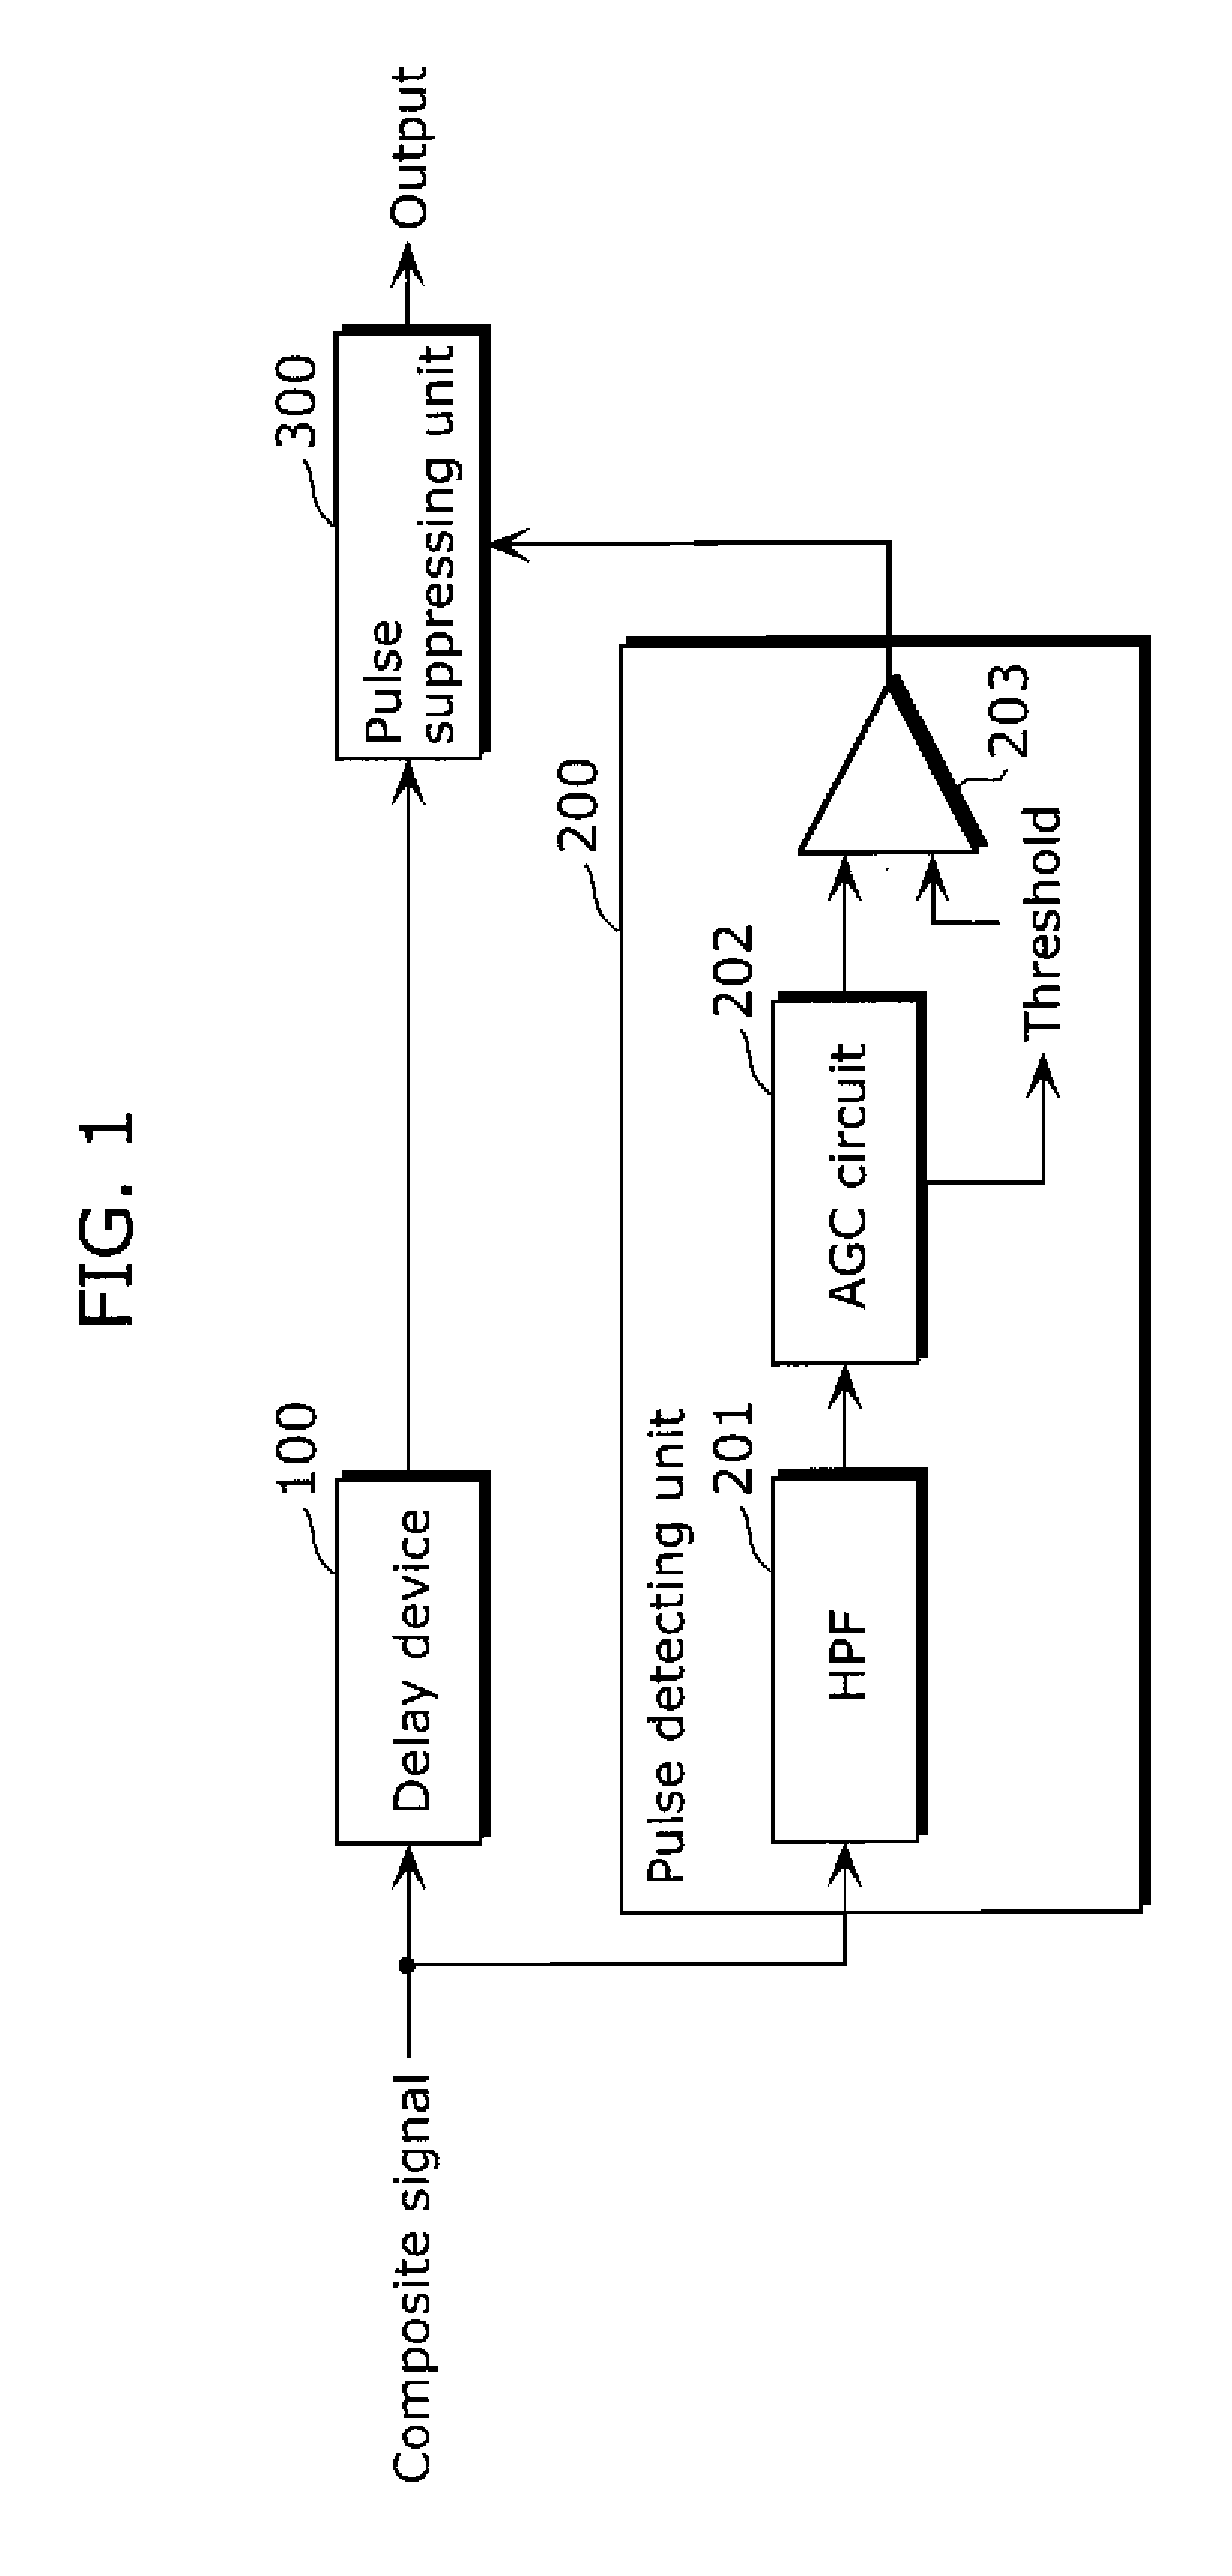 Noise suppressing device